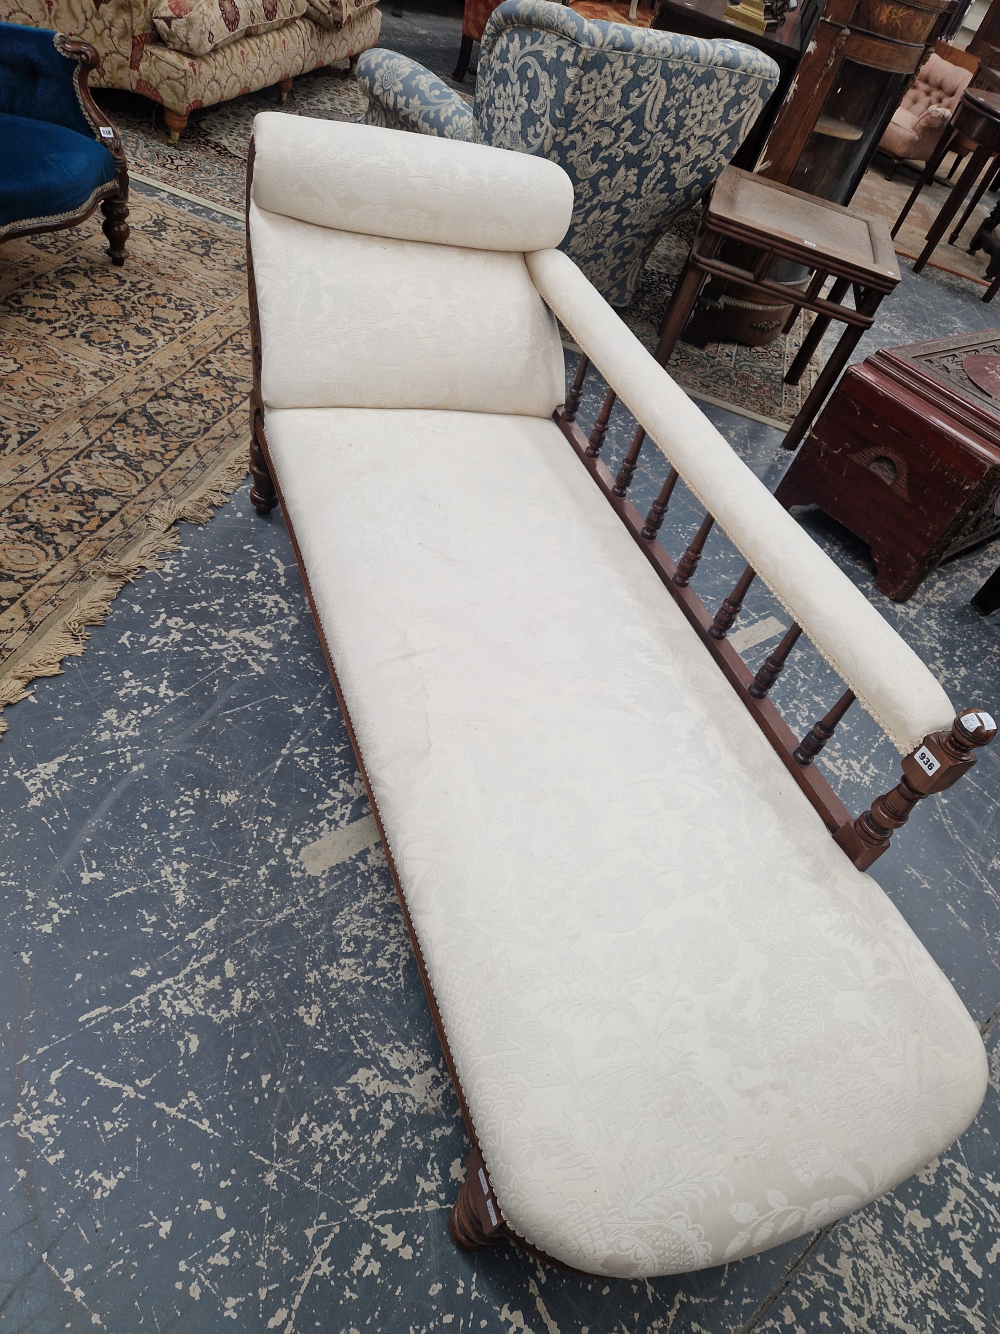 AN EARLY 20th C. MAHOGANY CHAISE LONGUE UPHOLSTERED IN WHITE DAMASK, ONE LONG SIDE WITH A BALUSTRADE - Image 5 of 6